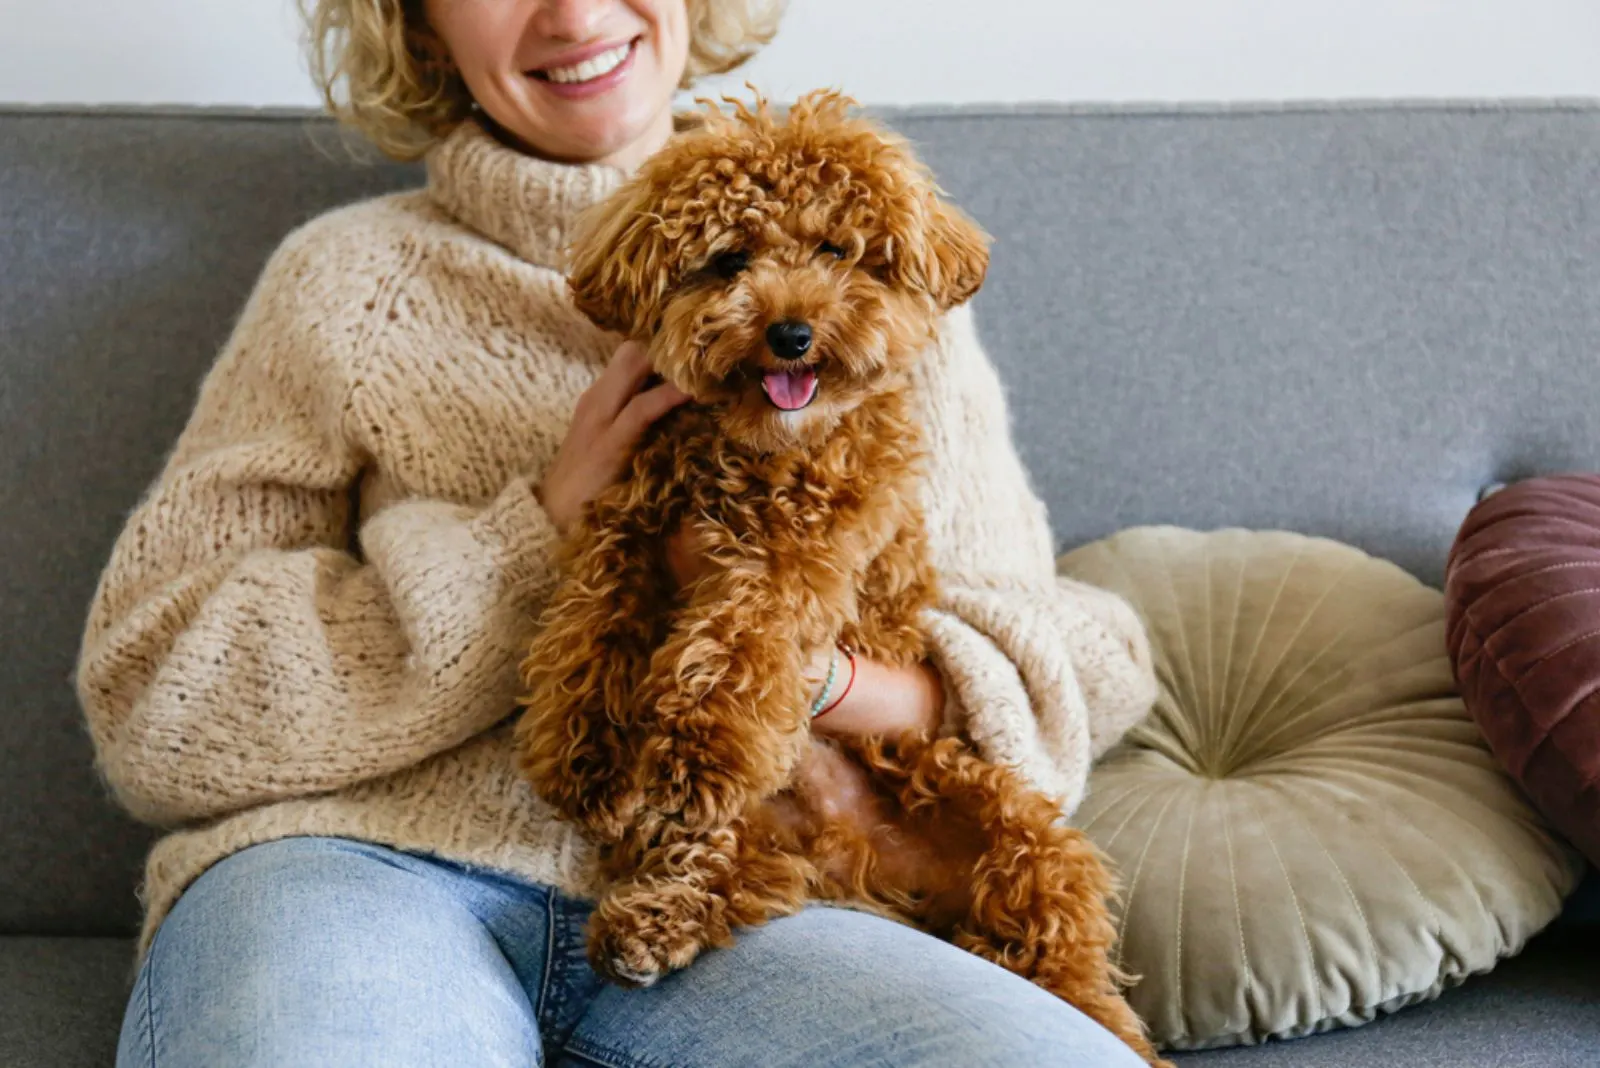 woman holding toy poodle in her arms on the couch